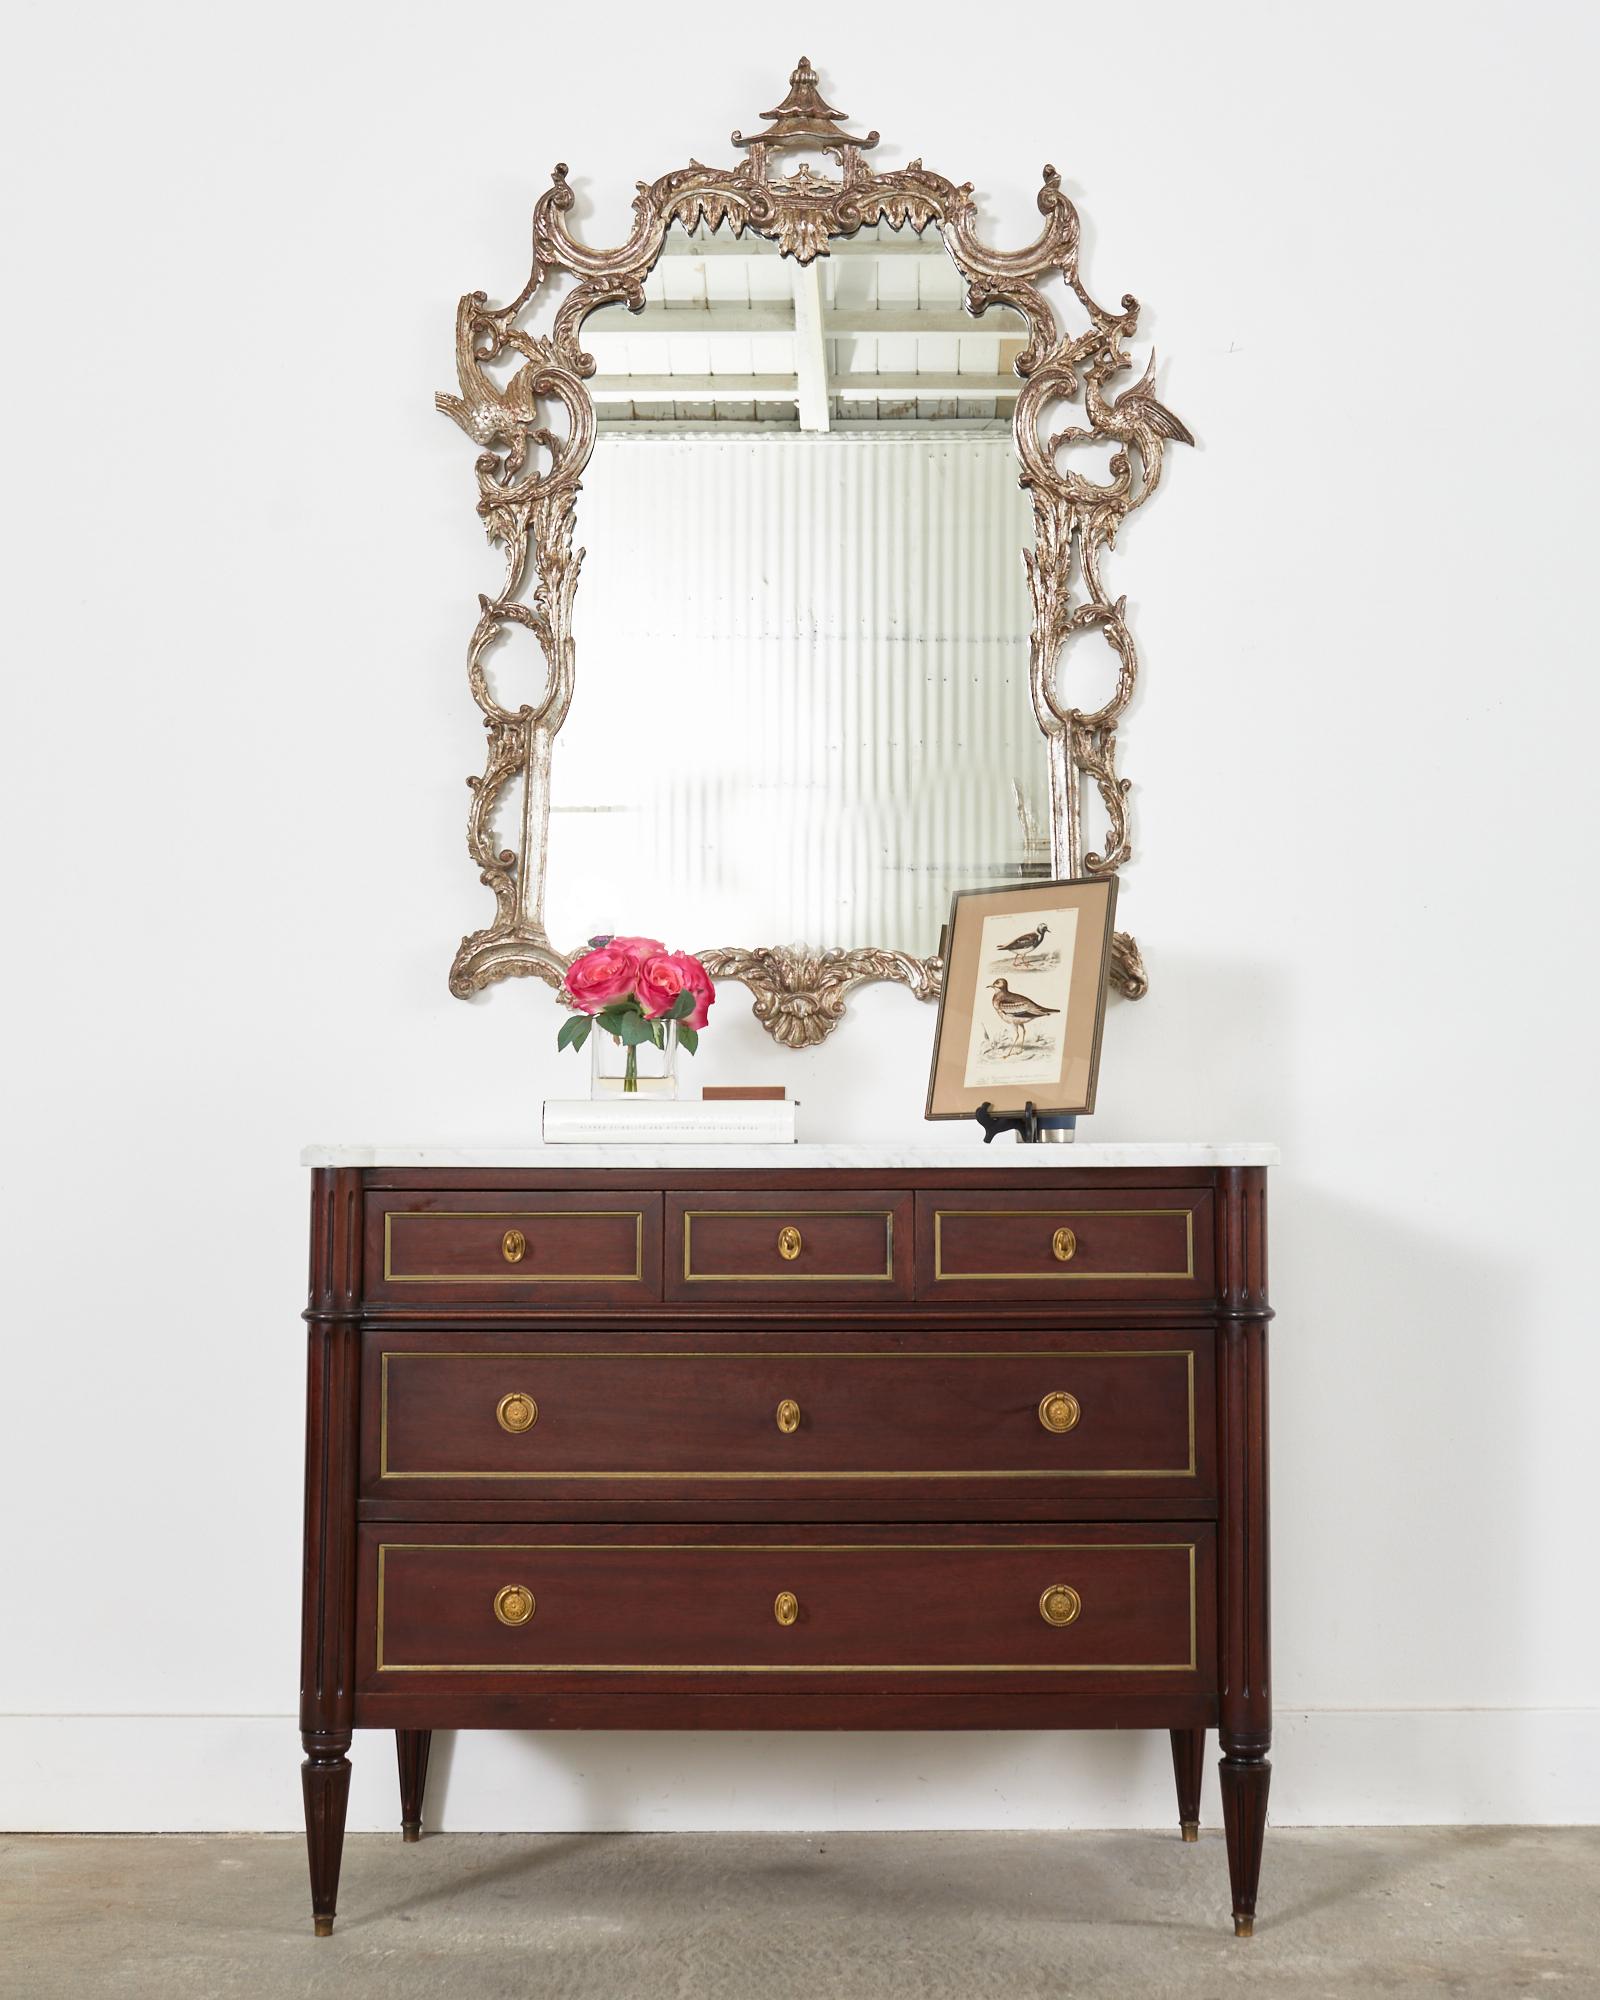 Opulent Italian silver gilt pagoda mirror made in the George III Chinese Chippendale taste. The large wood framed mirror features an applied silver gilt finish with an intentionally aged patina. The frame is crafted from C scrolls decorating the